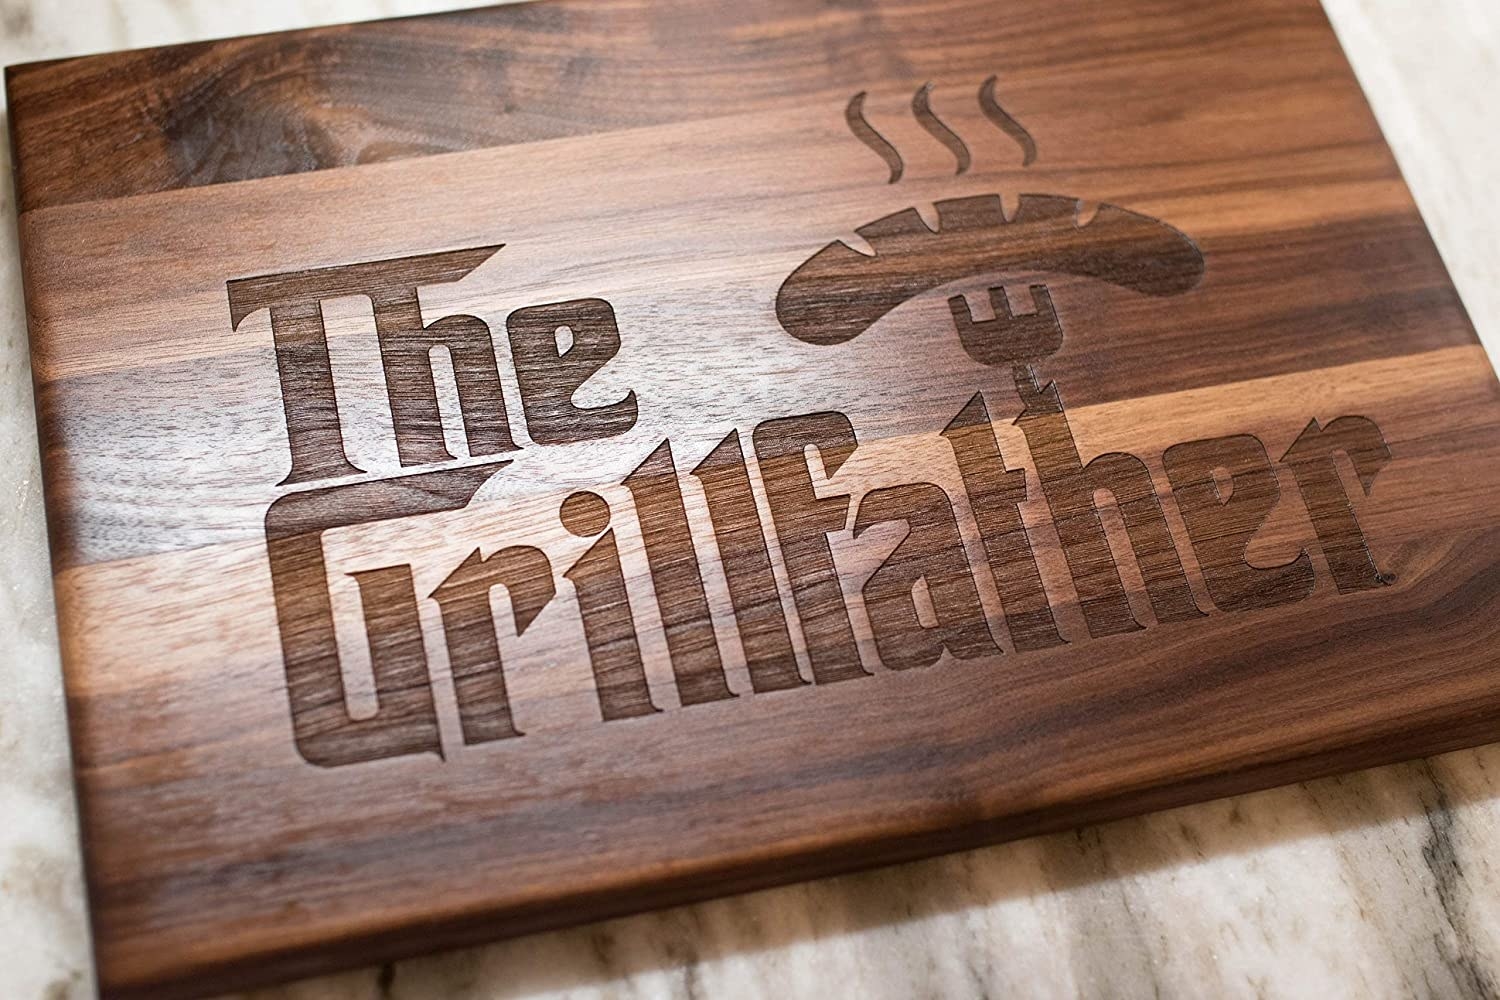 wooden cutting board that says &quot;The Grillfather&quot;